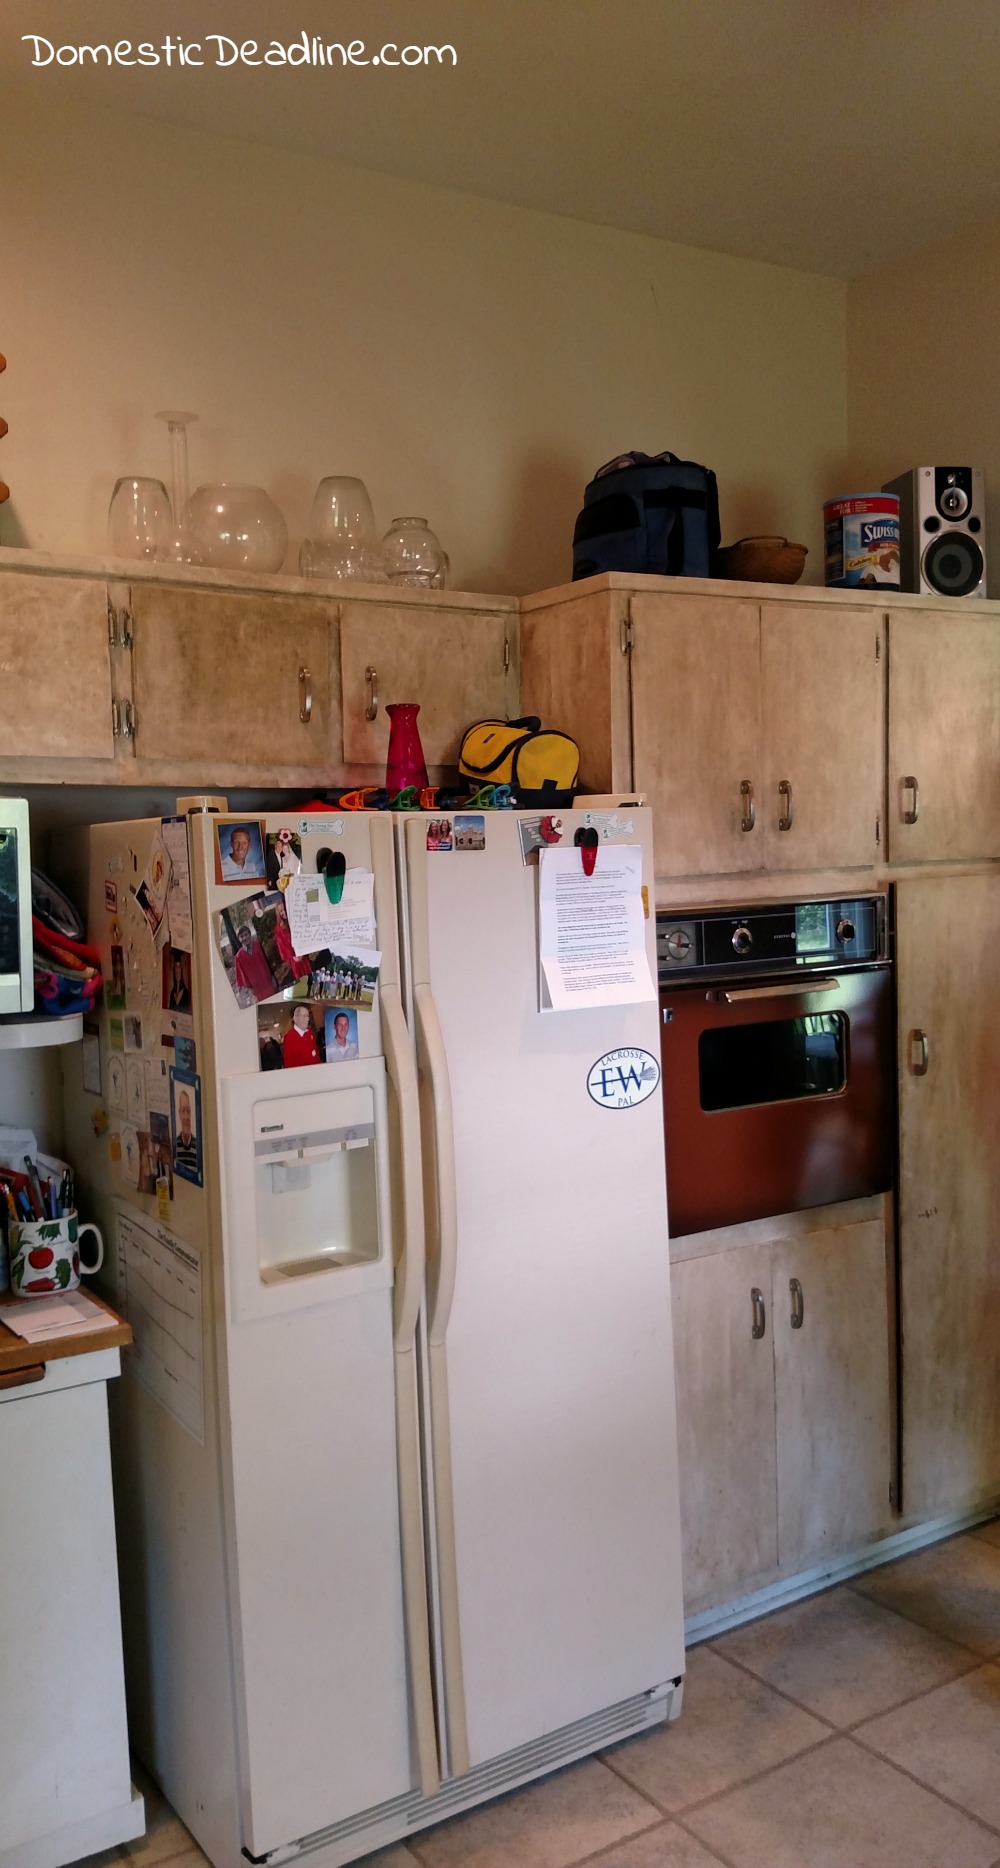 Learn how we gained twice as much cold storage, but saved thousands of dollars. Our DIY solution to expensive built-in fridge and freezer. DomesticDeadline.com